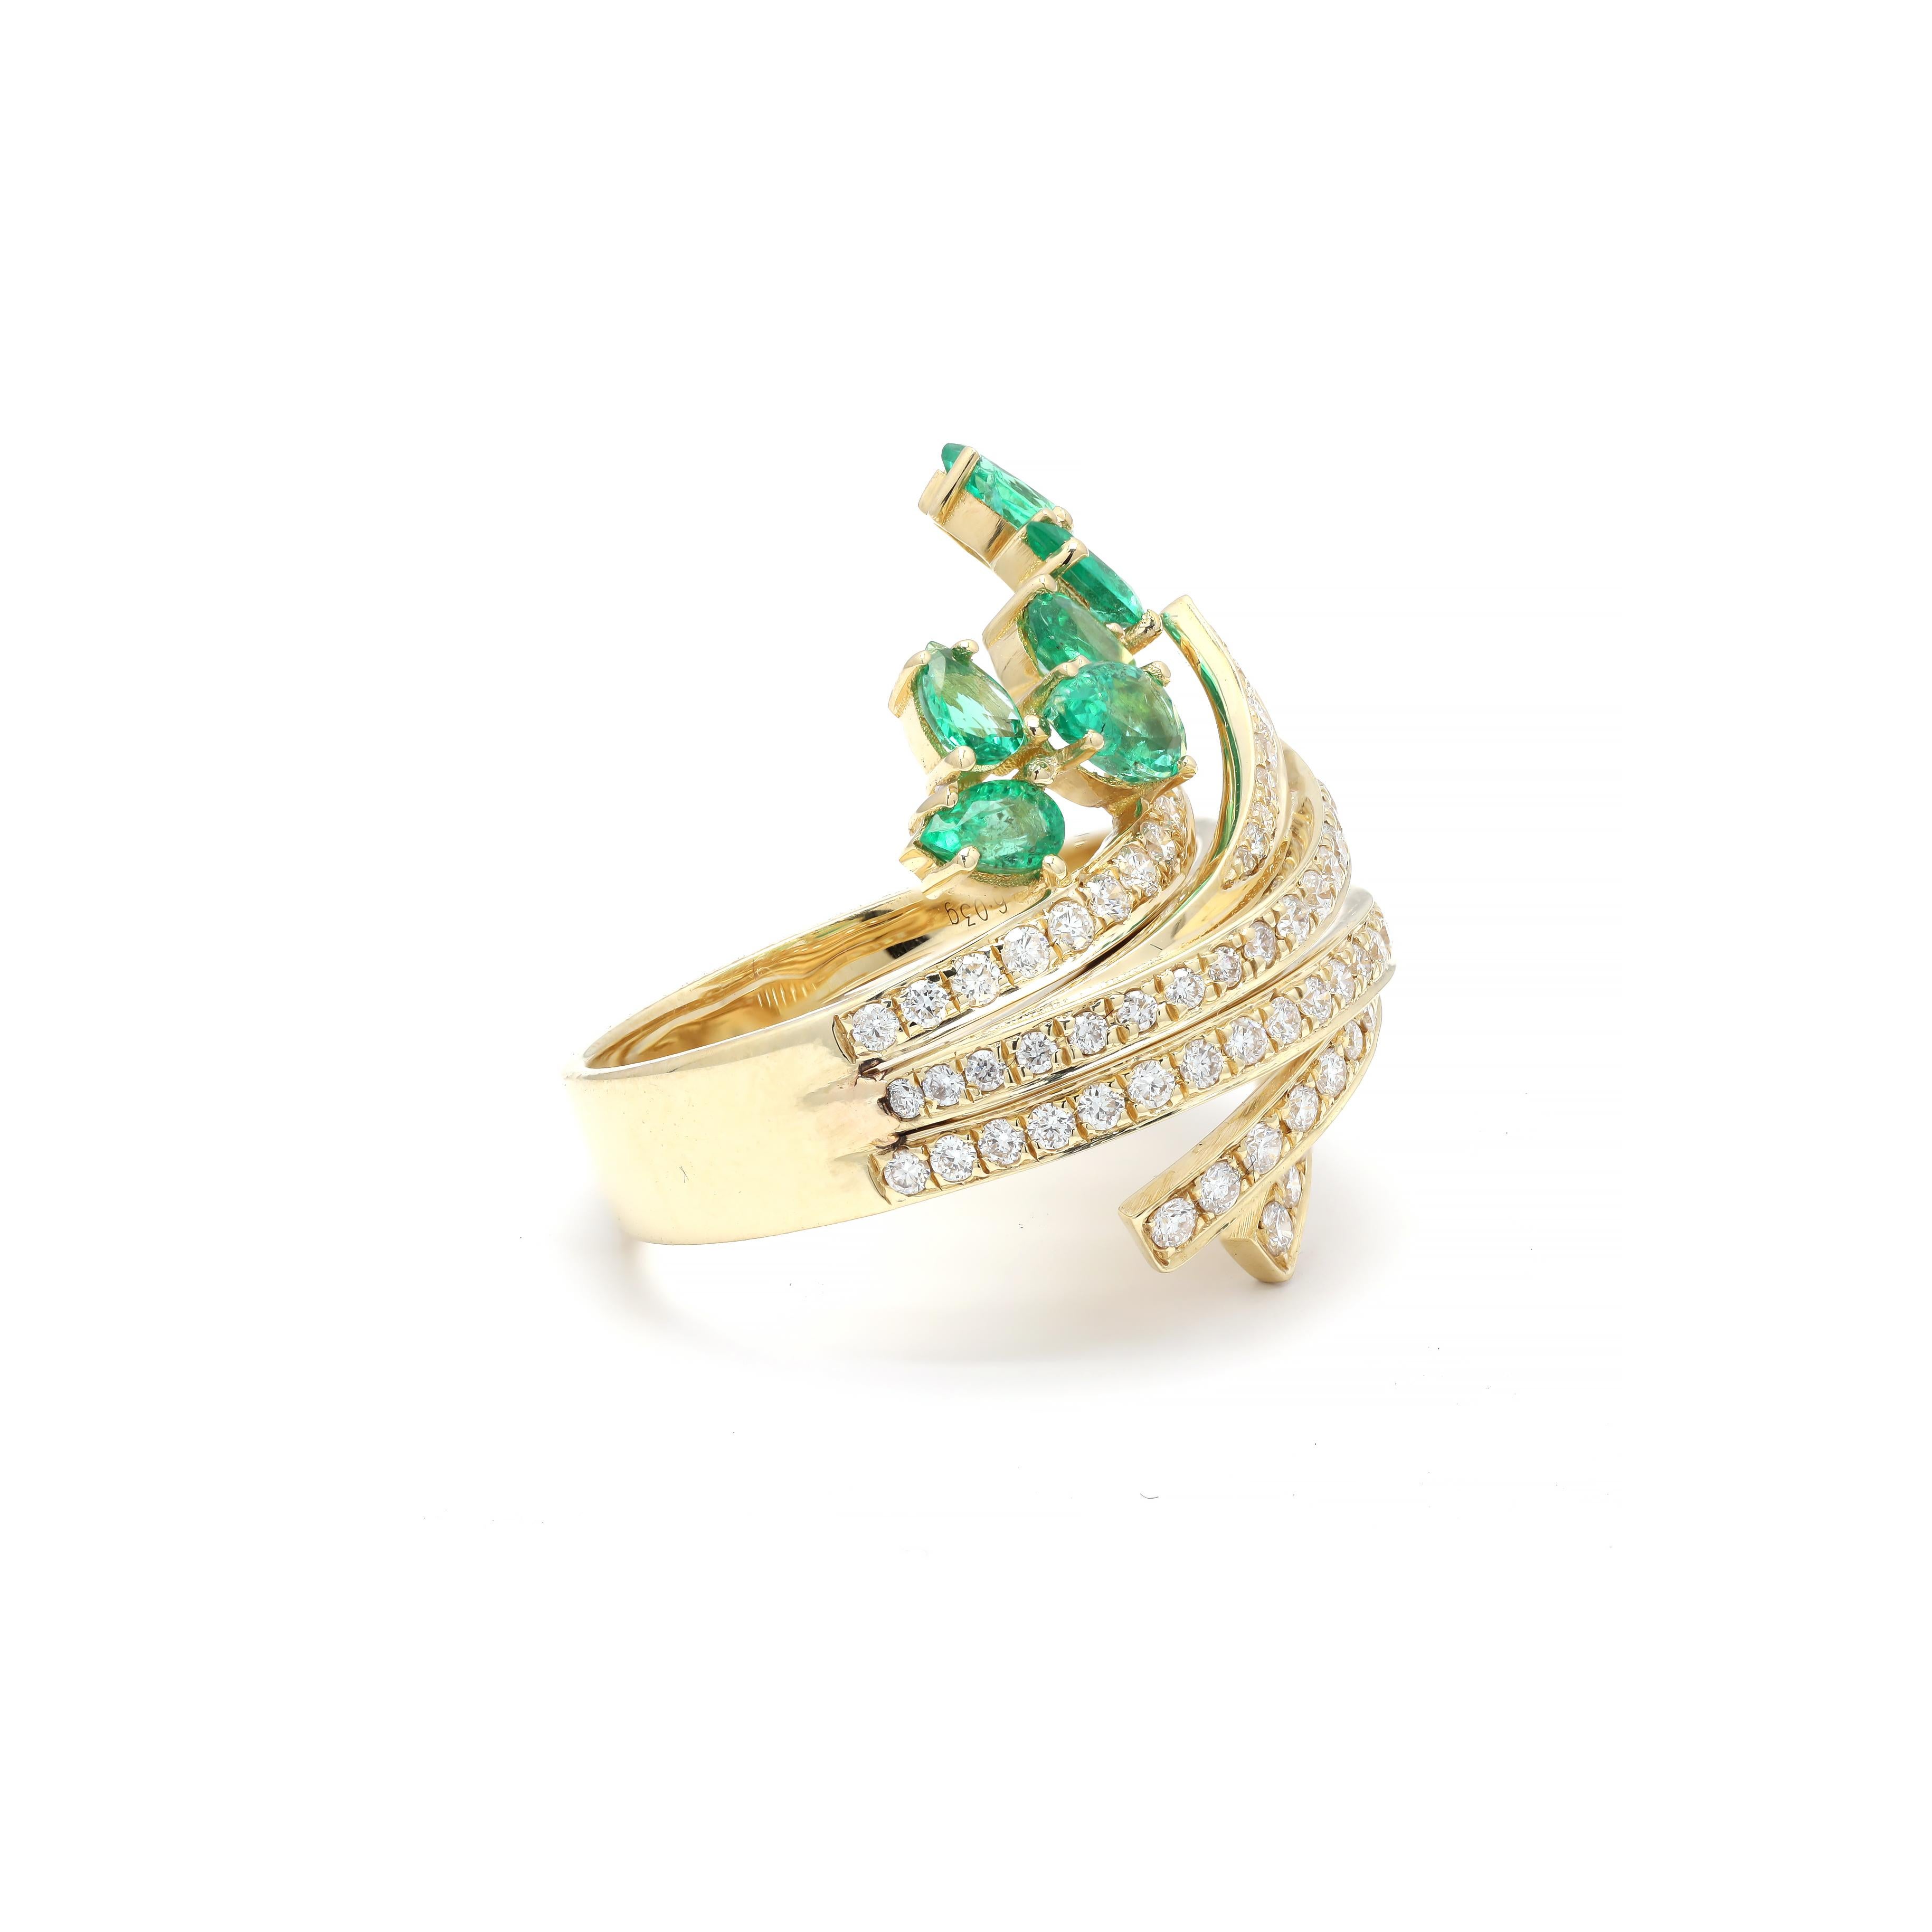 For Sale:  Modern Solid 14k Yellow Gold Diamond Emerald Wedding Party Ring, Emerald Ring 3